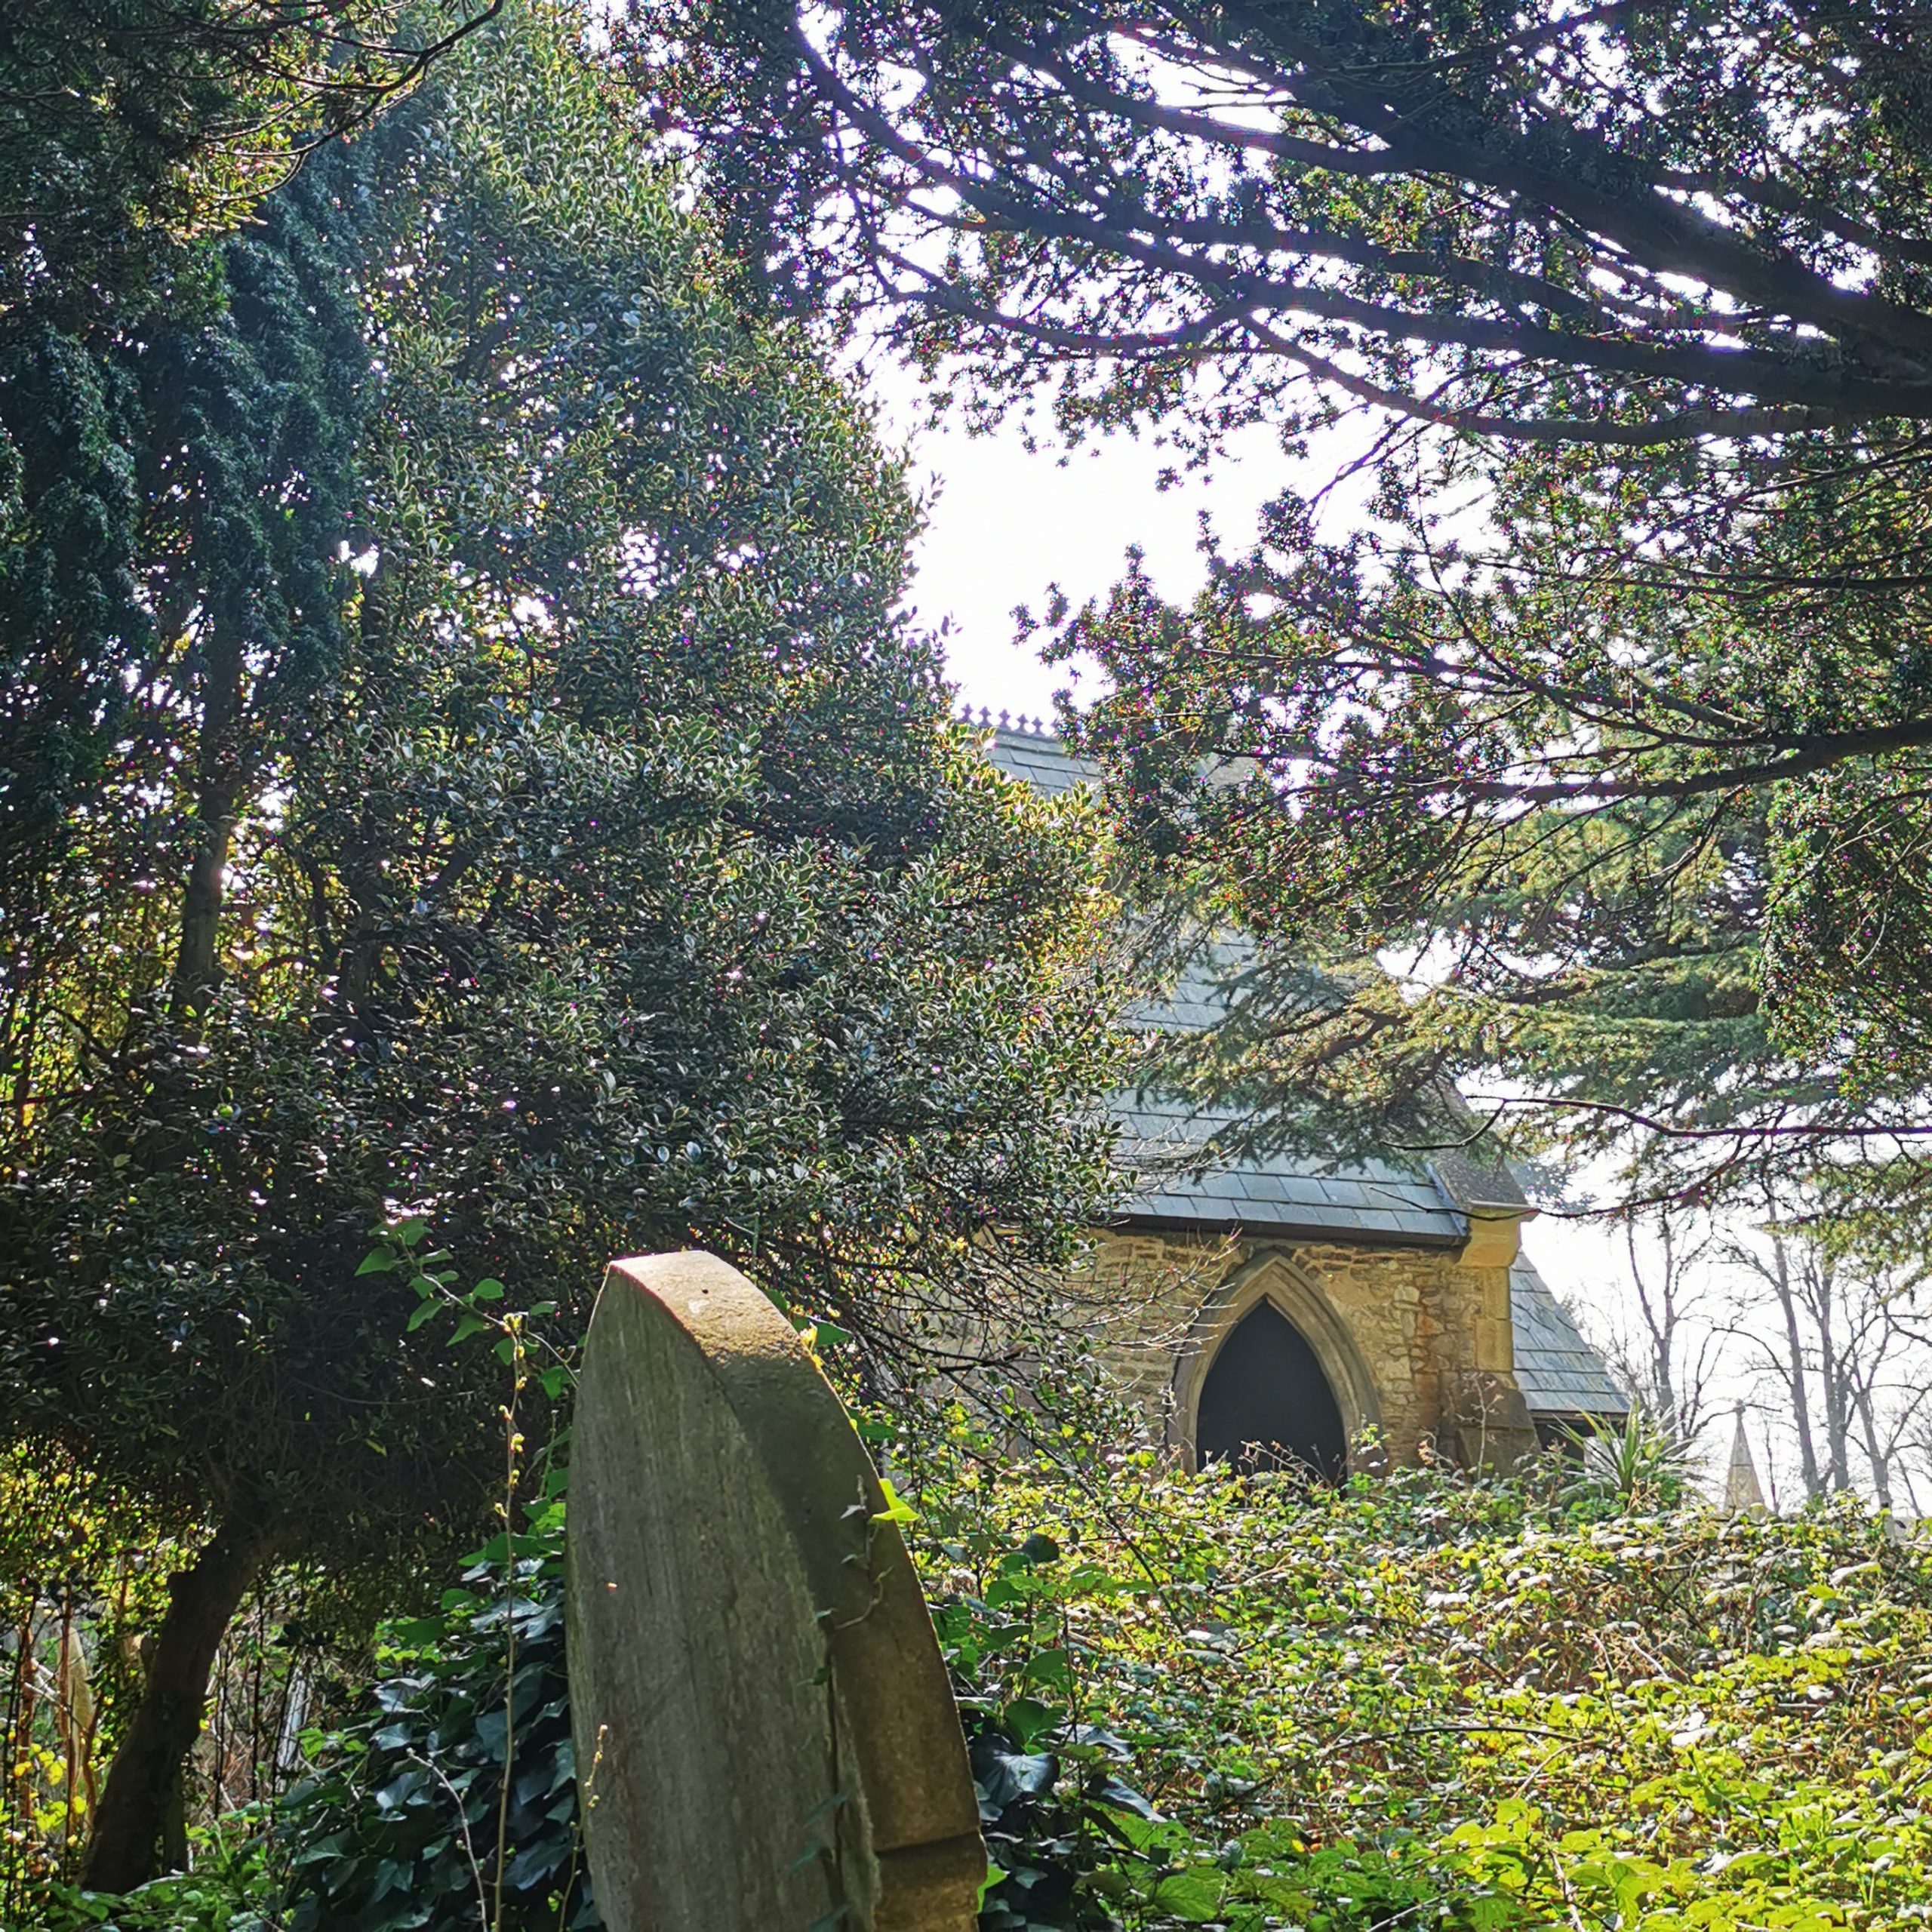 In the foreground is a side view of a gravestone that is leaning slightly to the left. Beyonce the gravestone the corner of a Gothic Chapel of Rest can be seen between shrubbery and tree cover